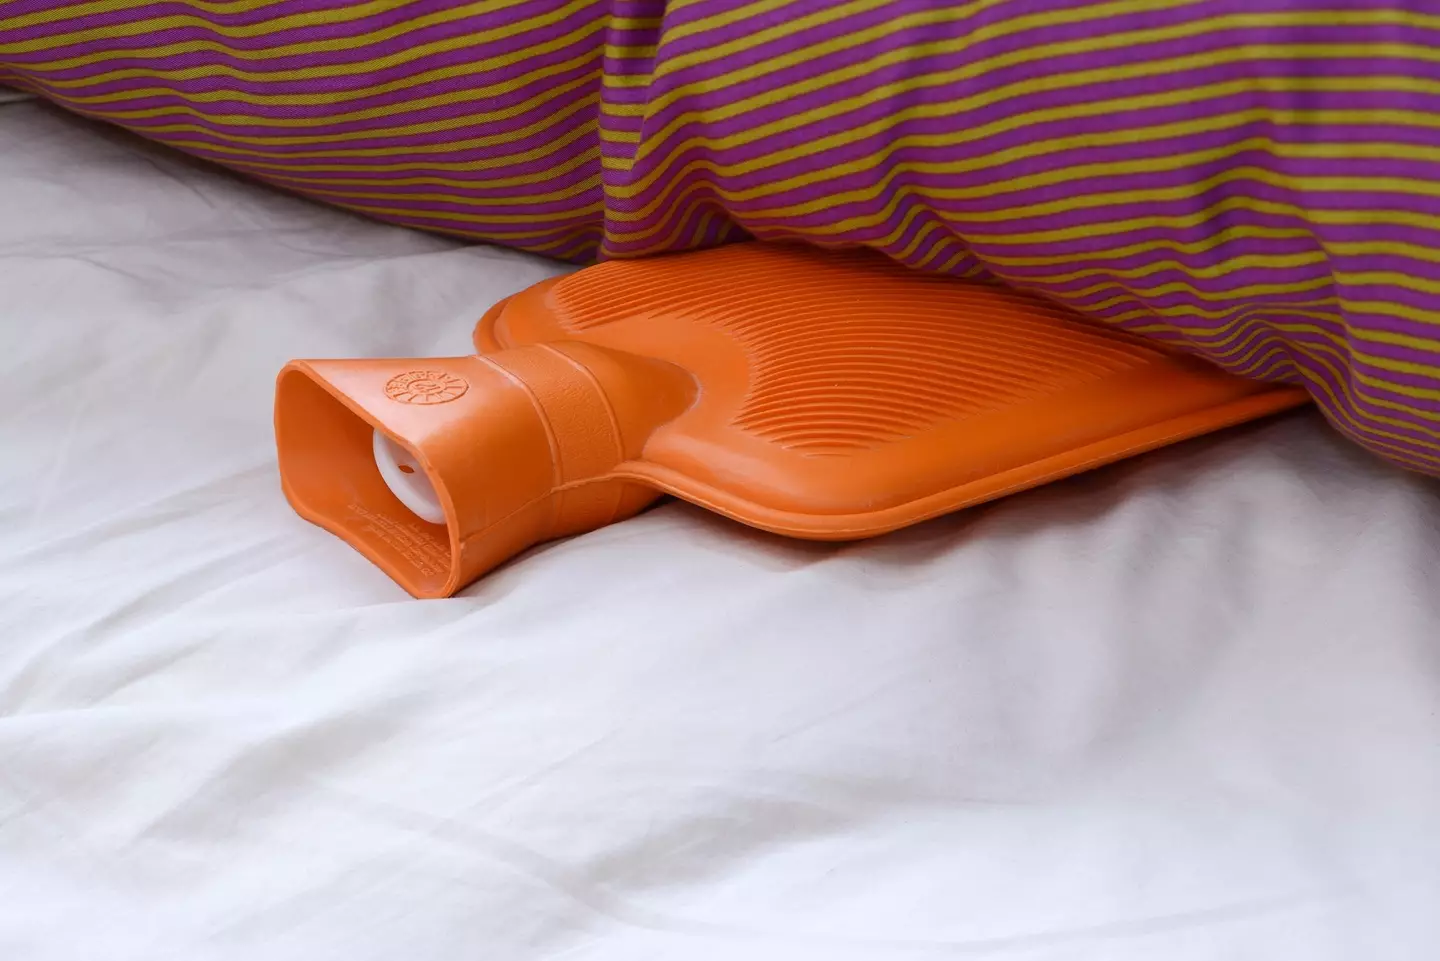 Hot water bottles can help you combat the heatwave.